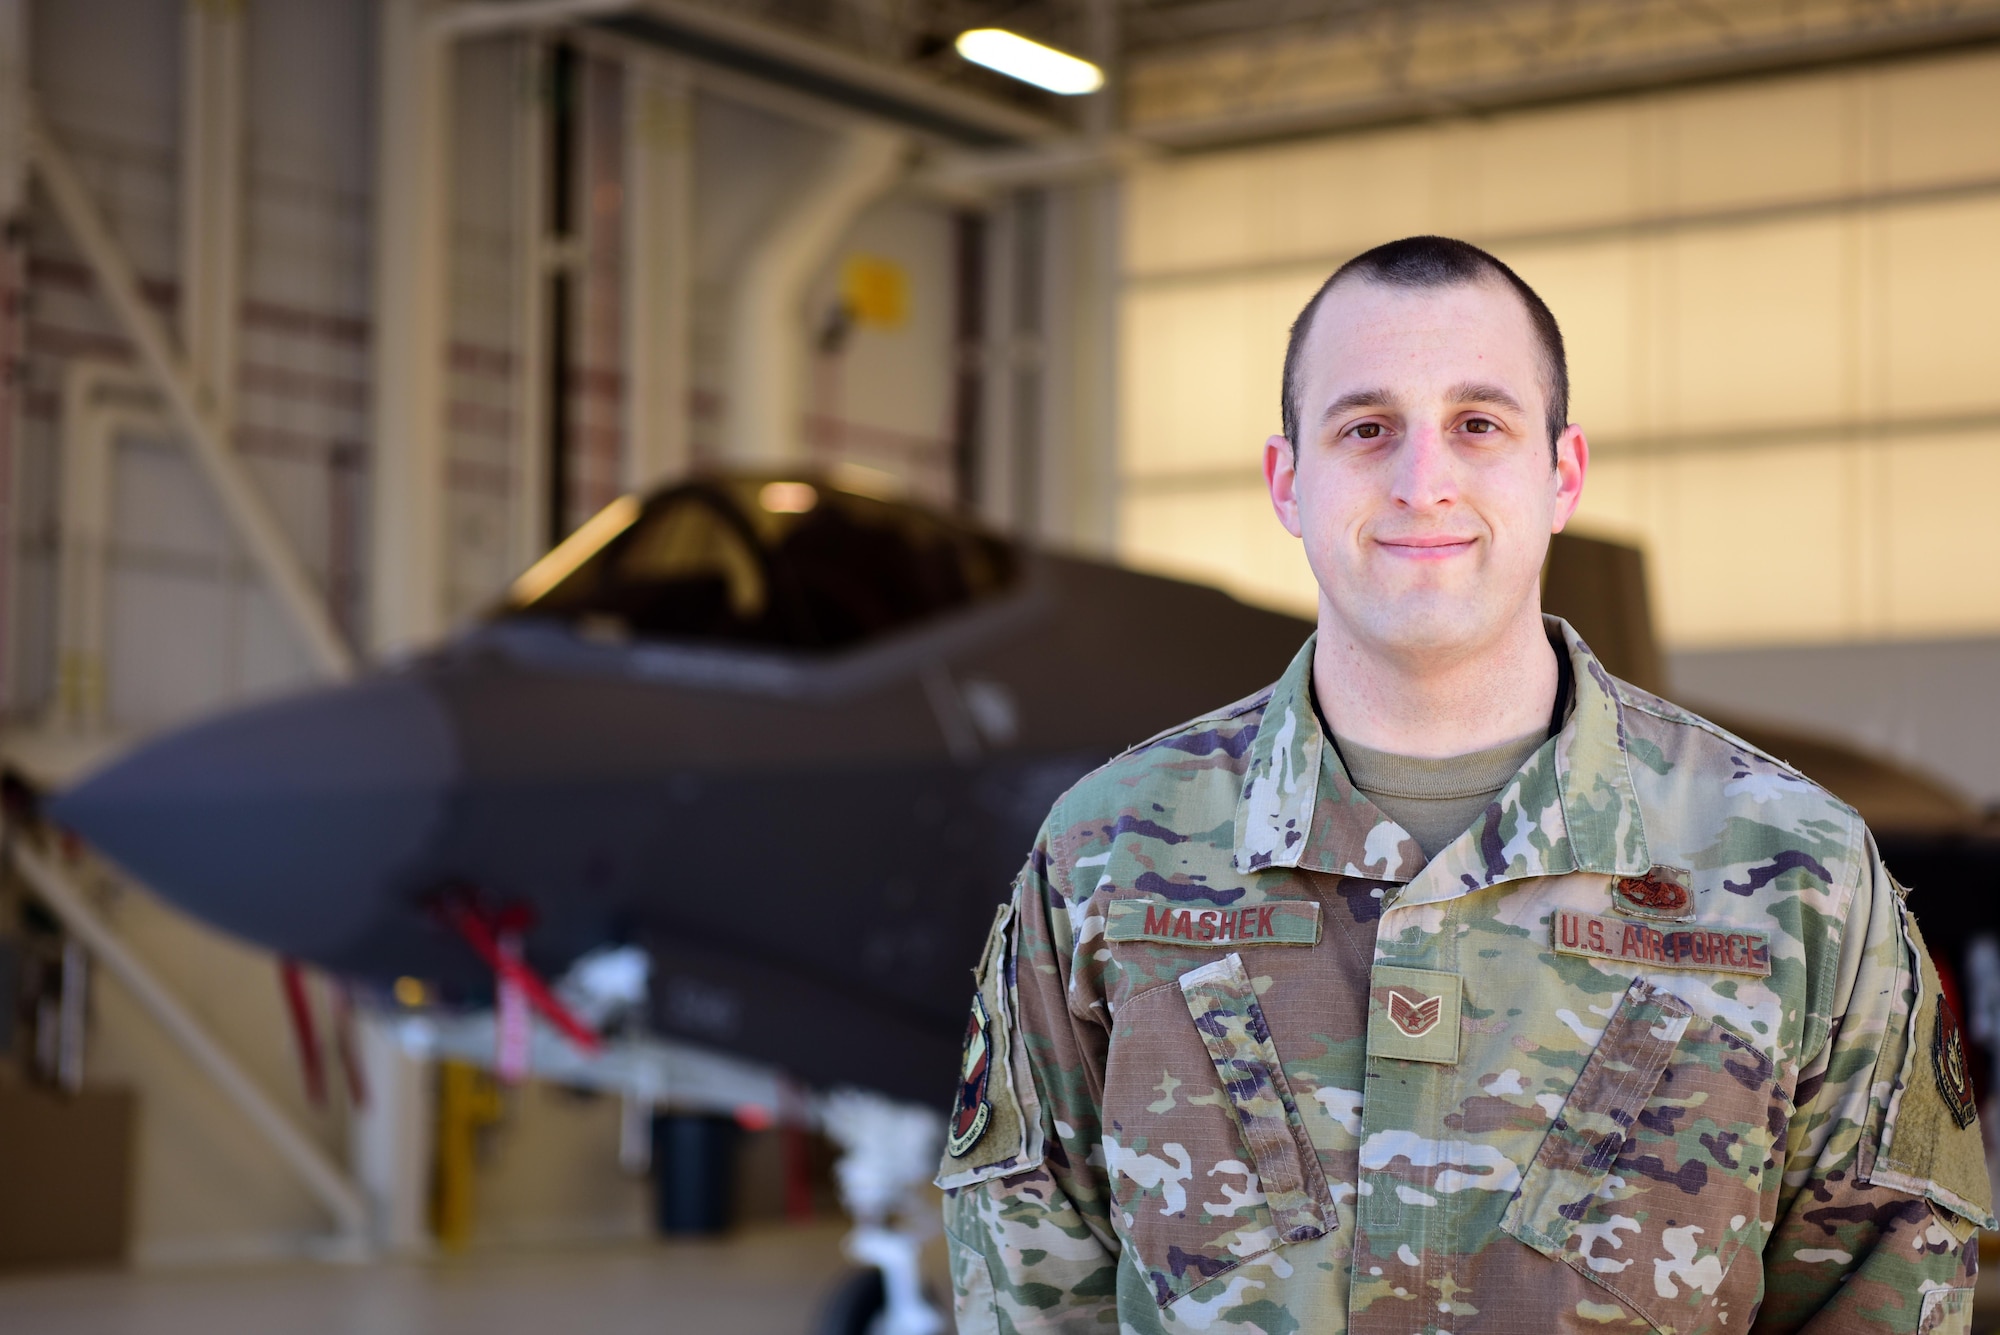 U.S. Air Force Staff Sgt. Christopher Mashek, a 356th Aircraft Maintenance Unit F-35A Lightning II crew chief, poses for a photo in front of an F-35A at Eielson Air Force Base, Alaska, May 1, 2020.